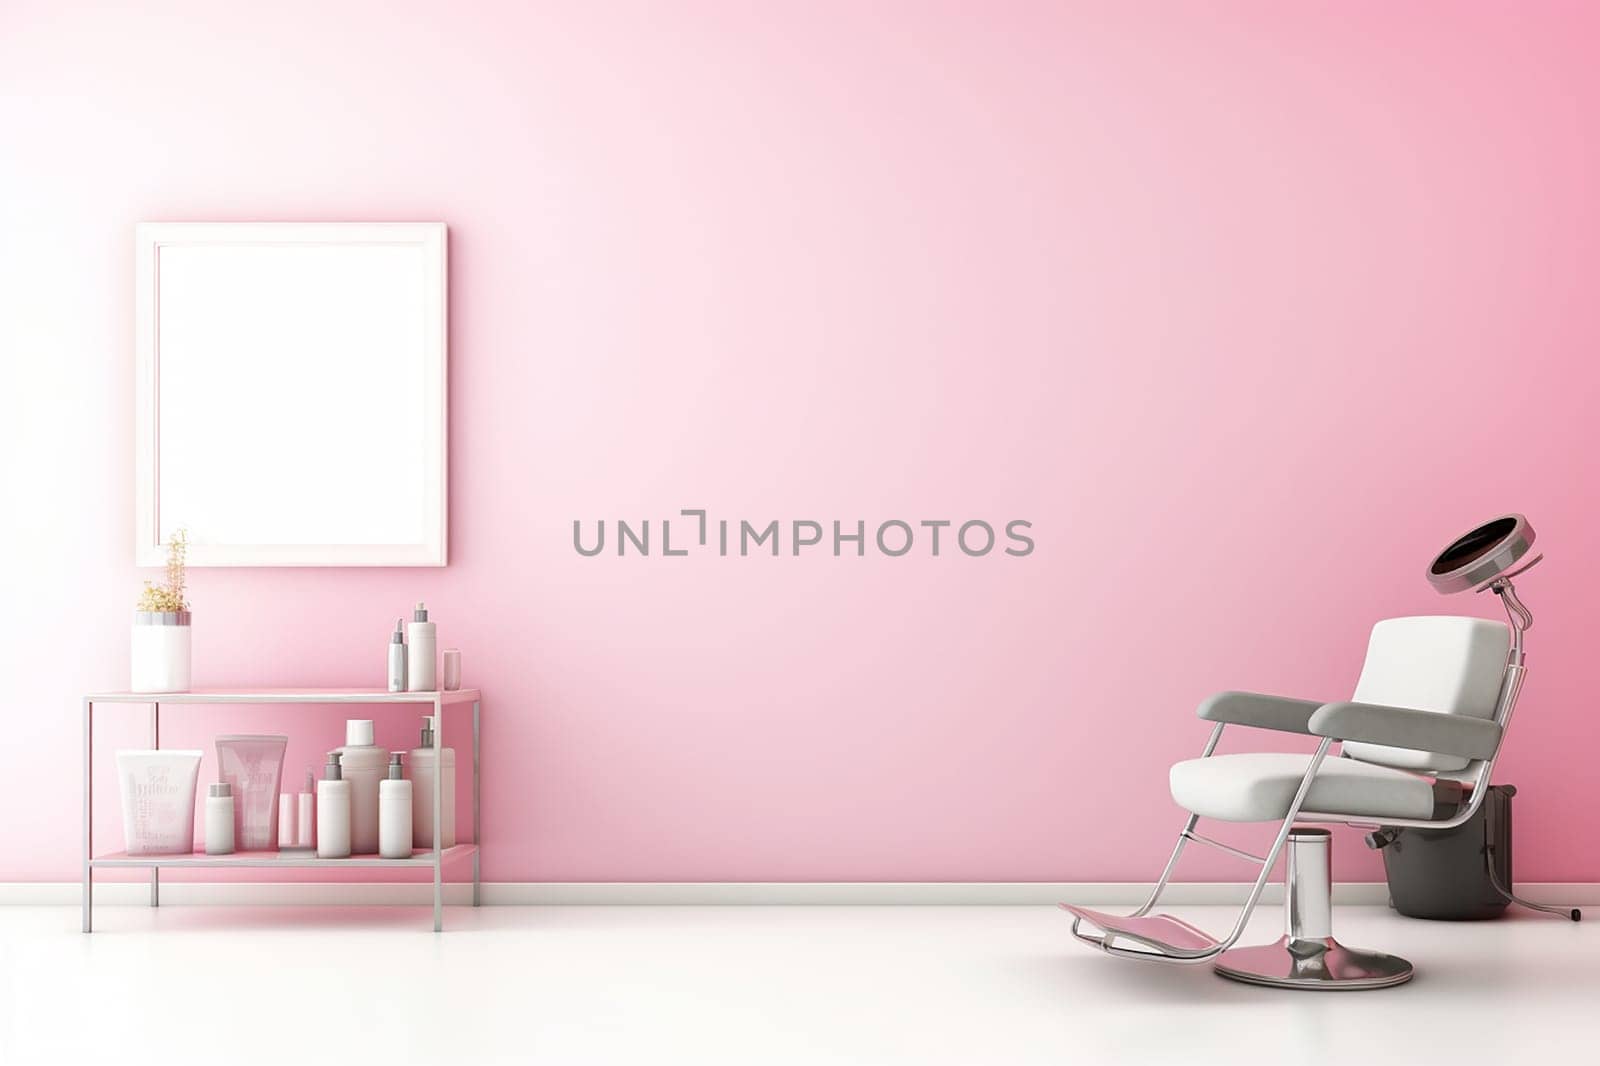 Modern salon interior with chair, table, and beauty products on pink wall background.